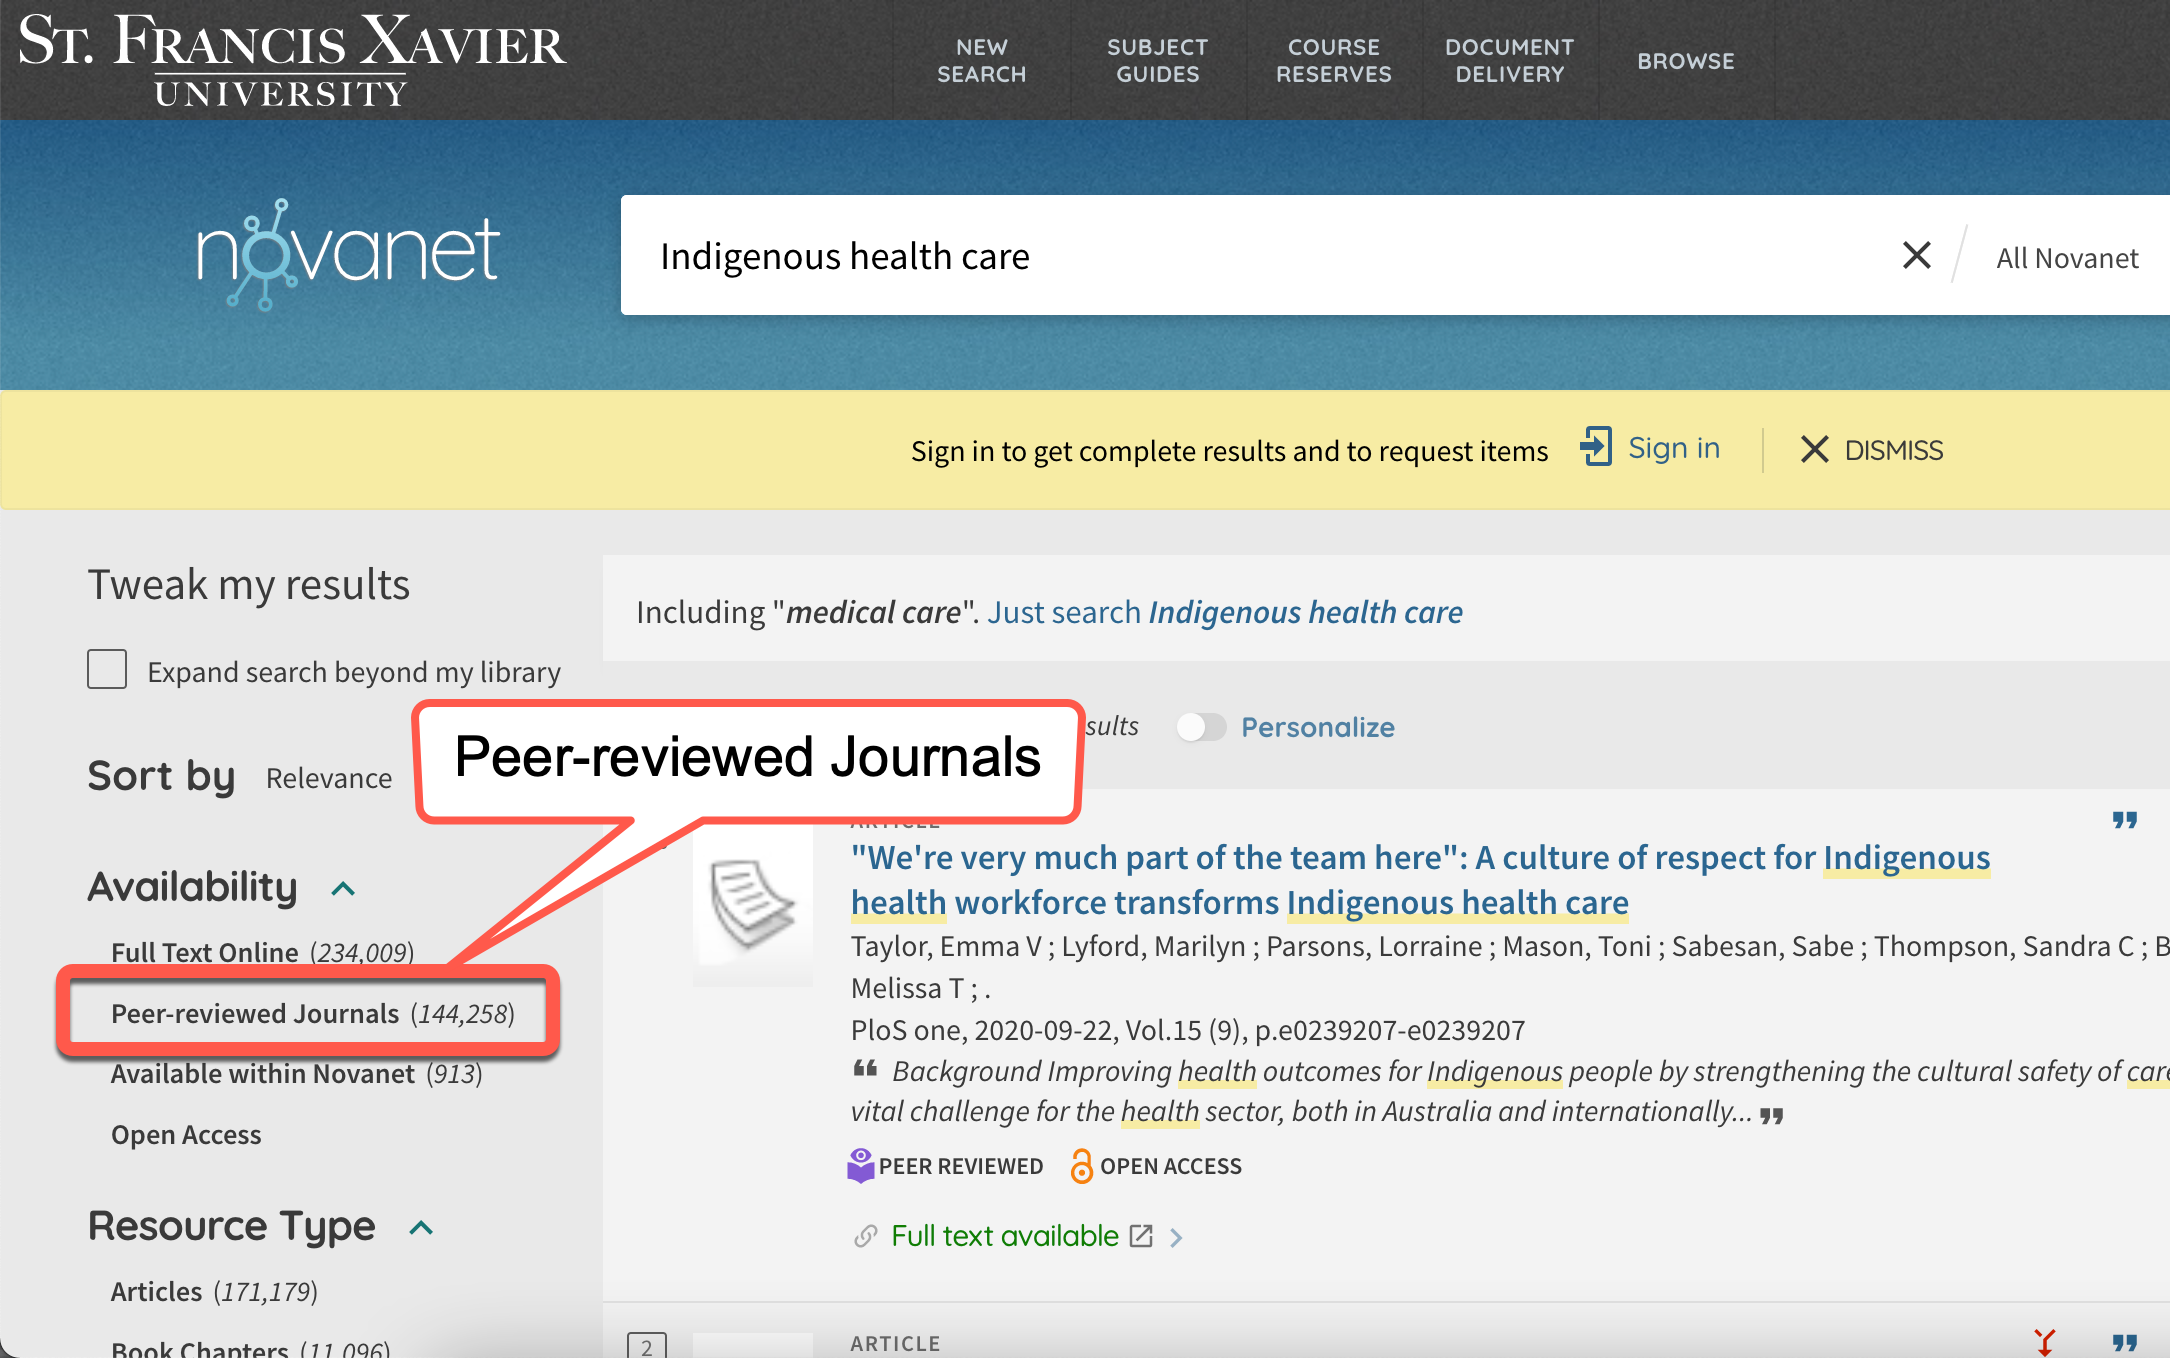 Screenshot of Novanet with the Peer-reviewed journals filter highlighted